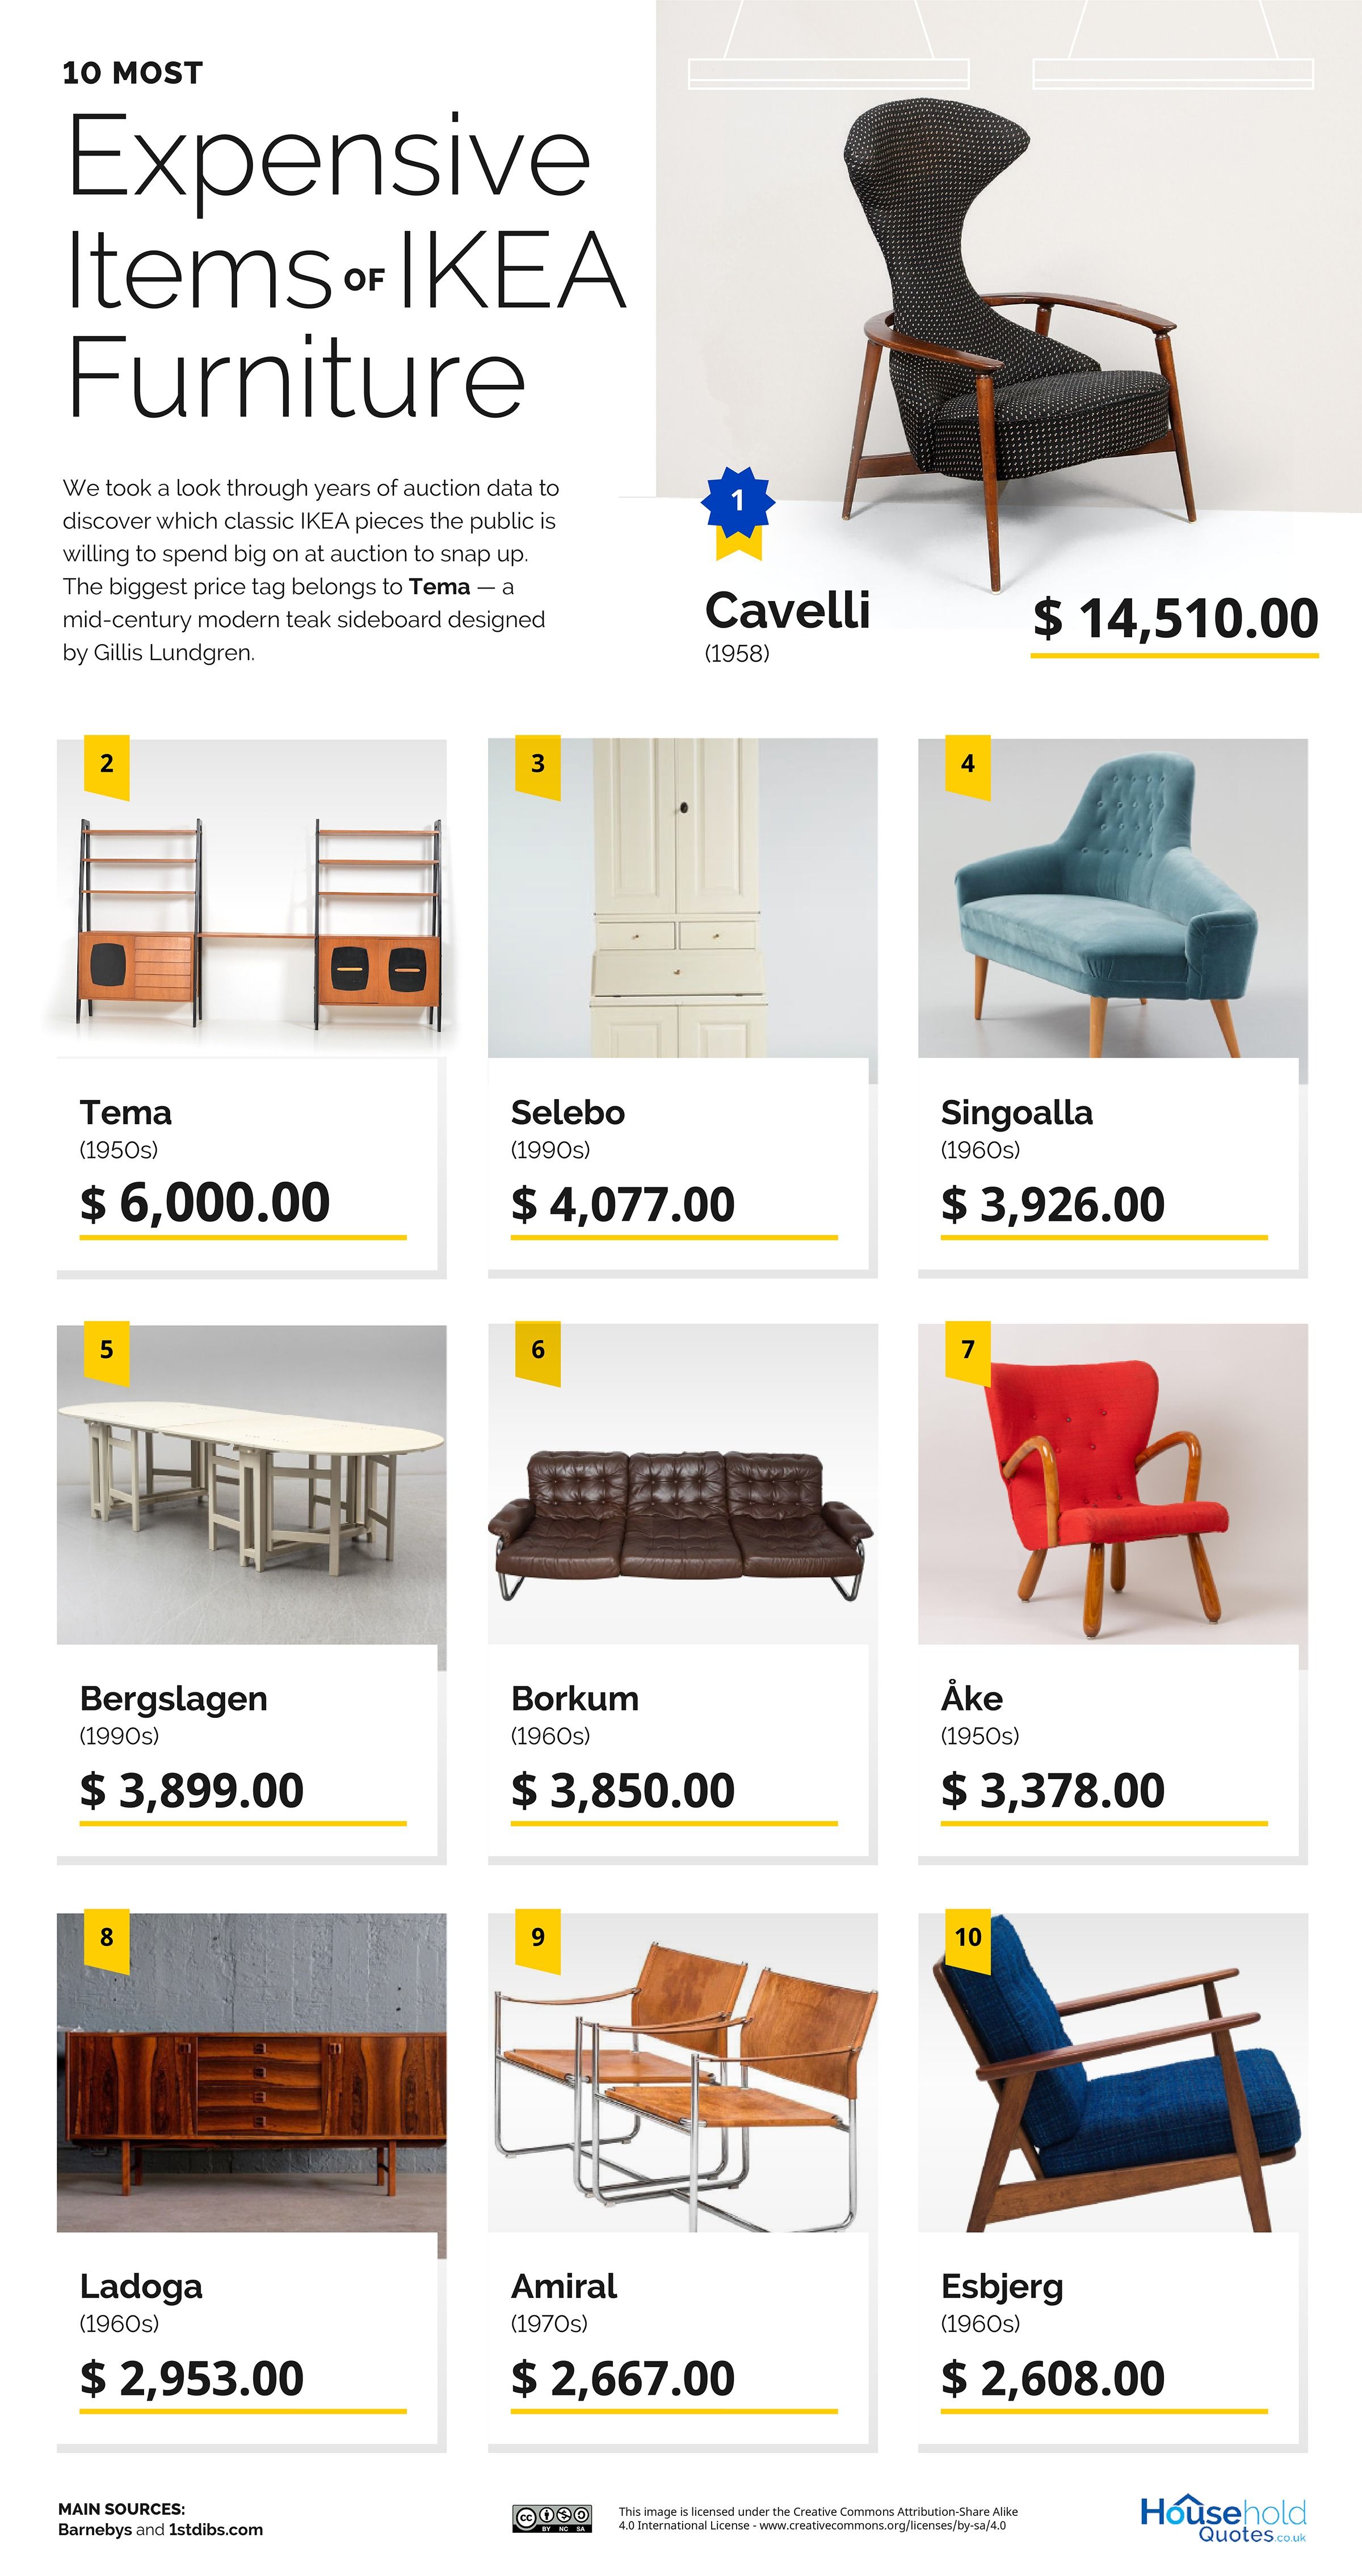 https://hips.hearstapps.com/hmg-prod/images/01-the-most-expensive-vintage-ikea-furniture-10-most-expensive-items-1639670771.jpg